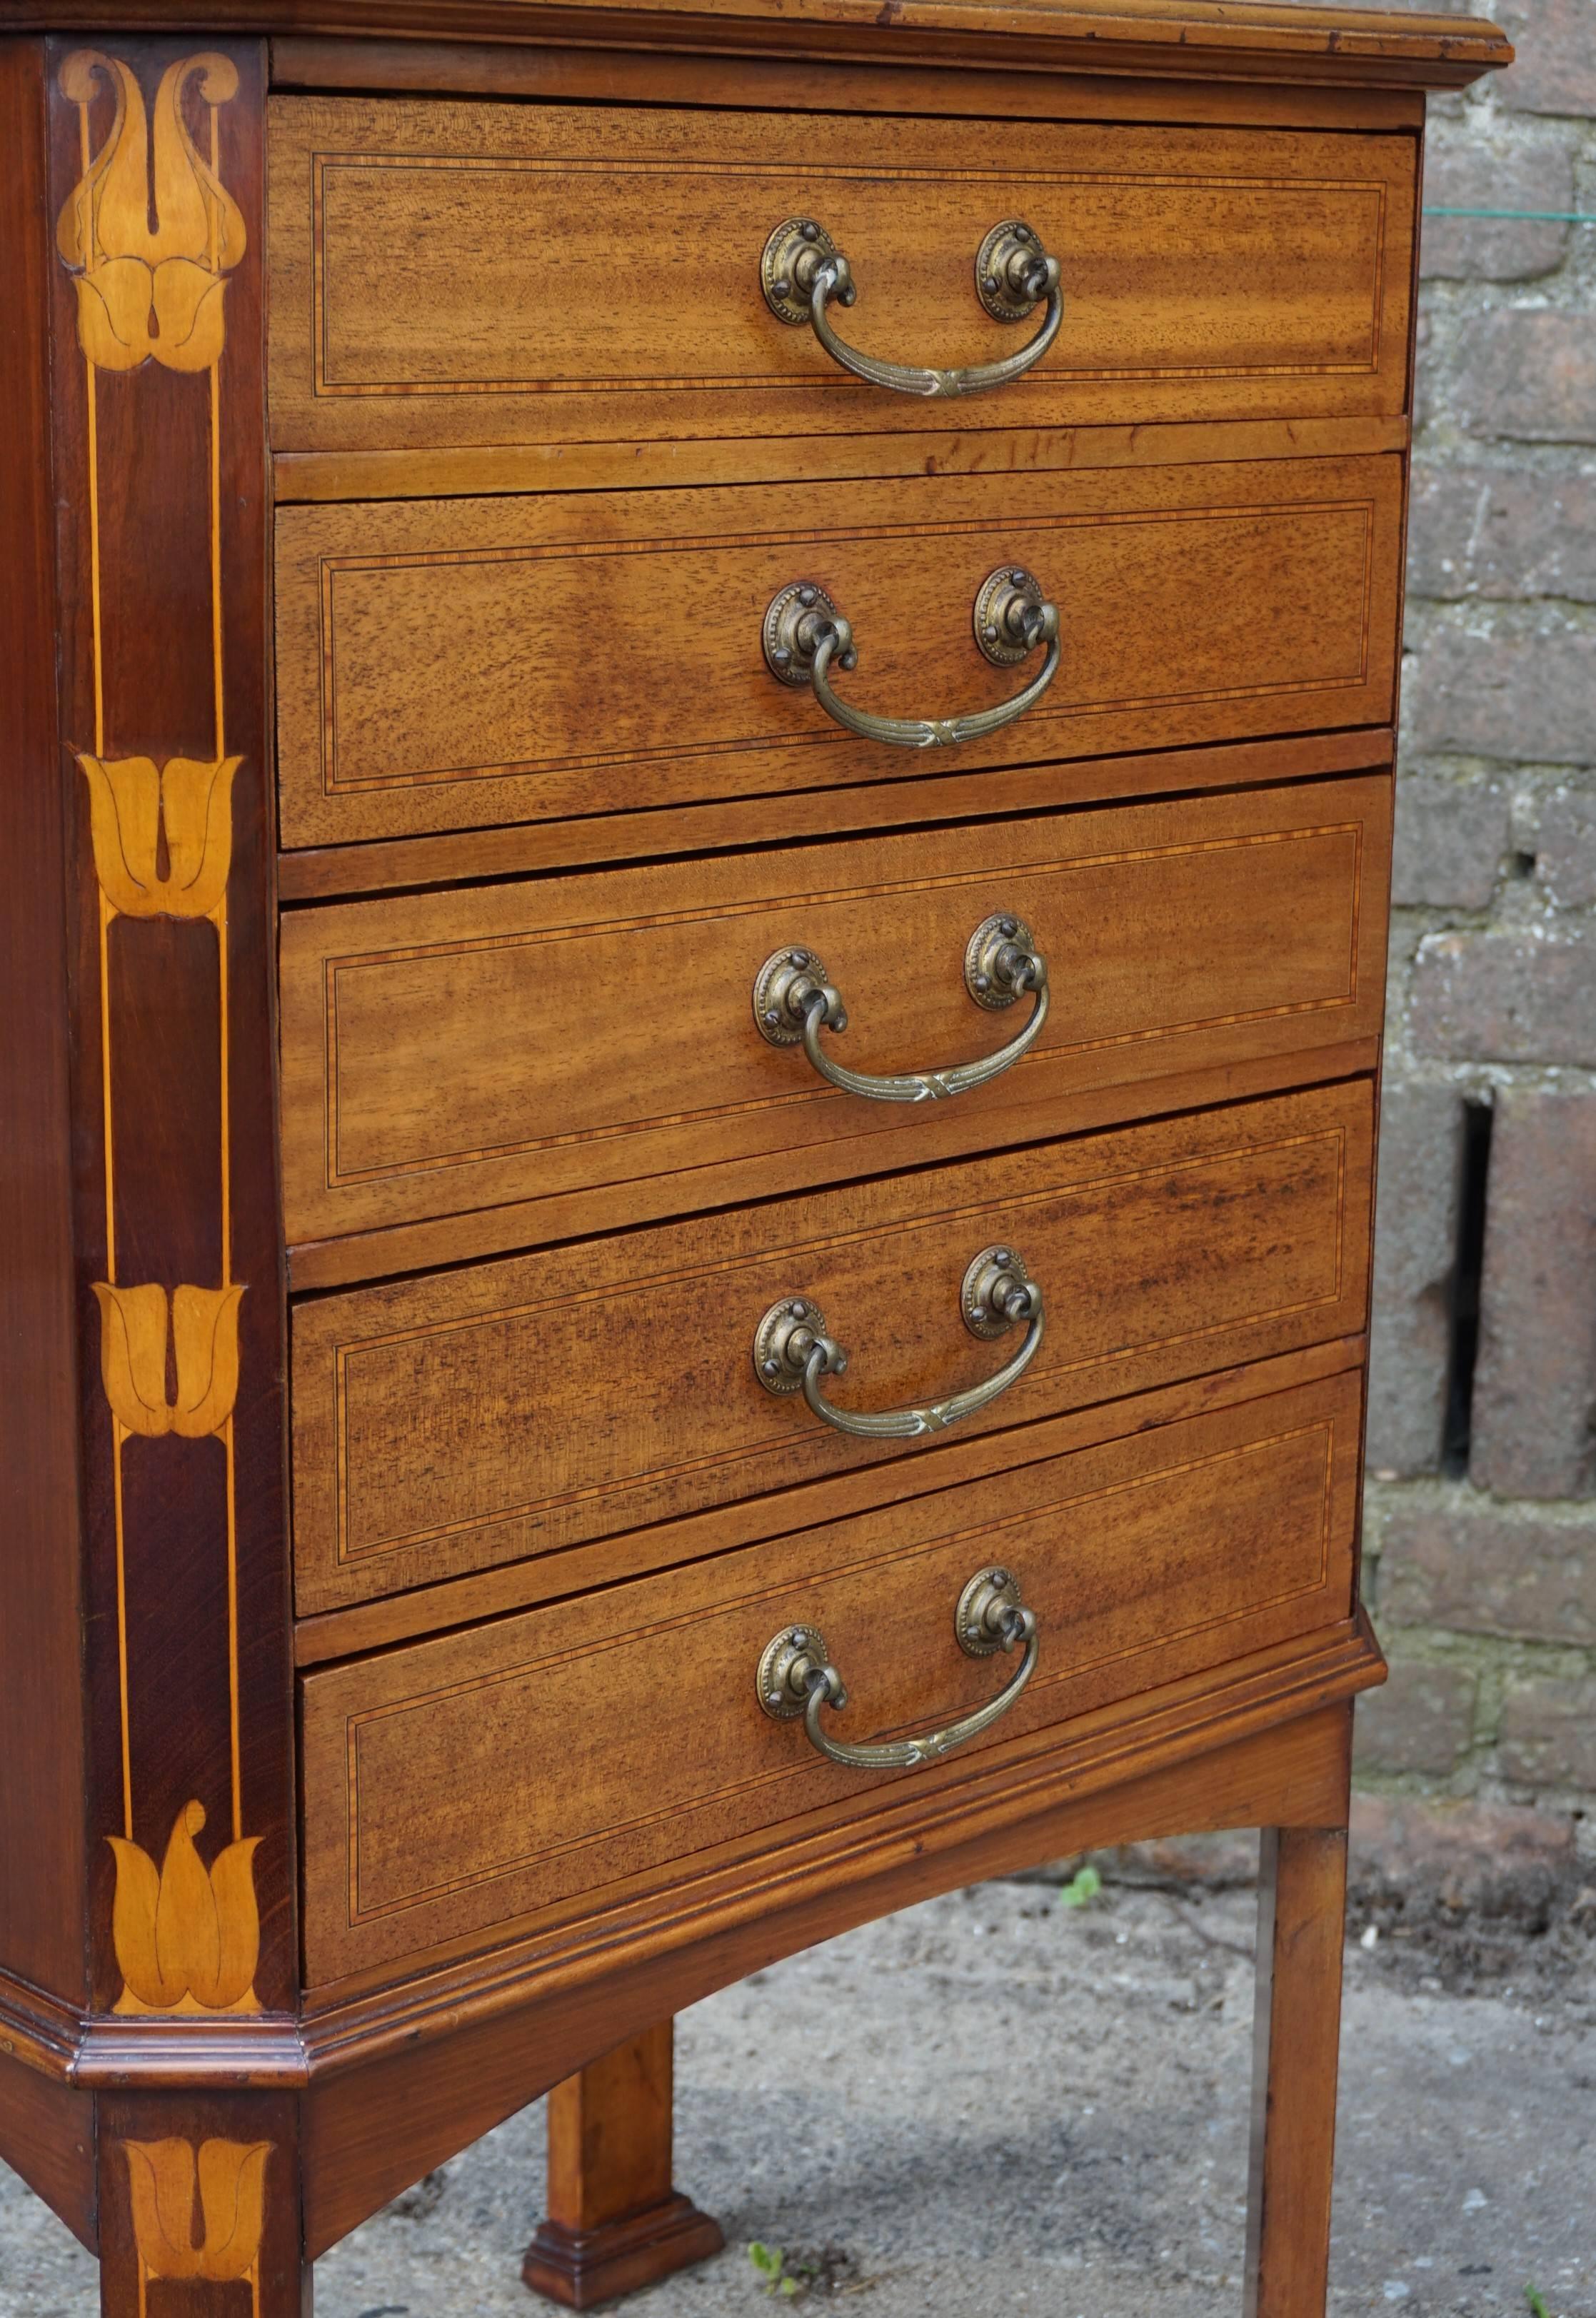 Hand-Crafted Striking Arts and Crafts Mahogany Filing Cabinet Inlaid with Stylized Flowers